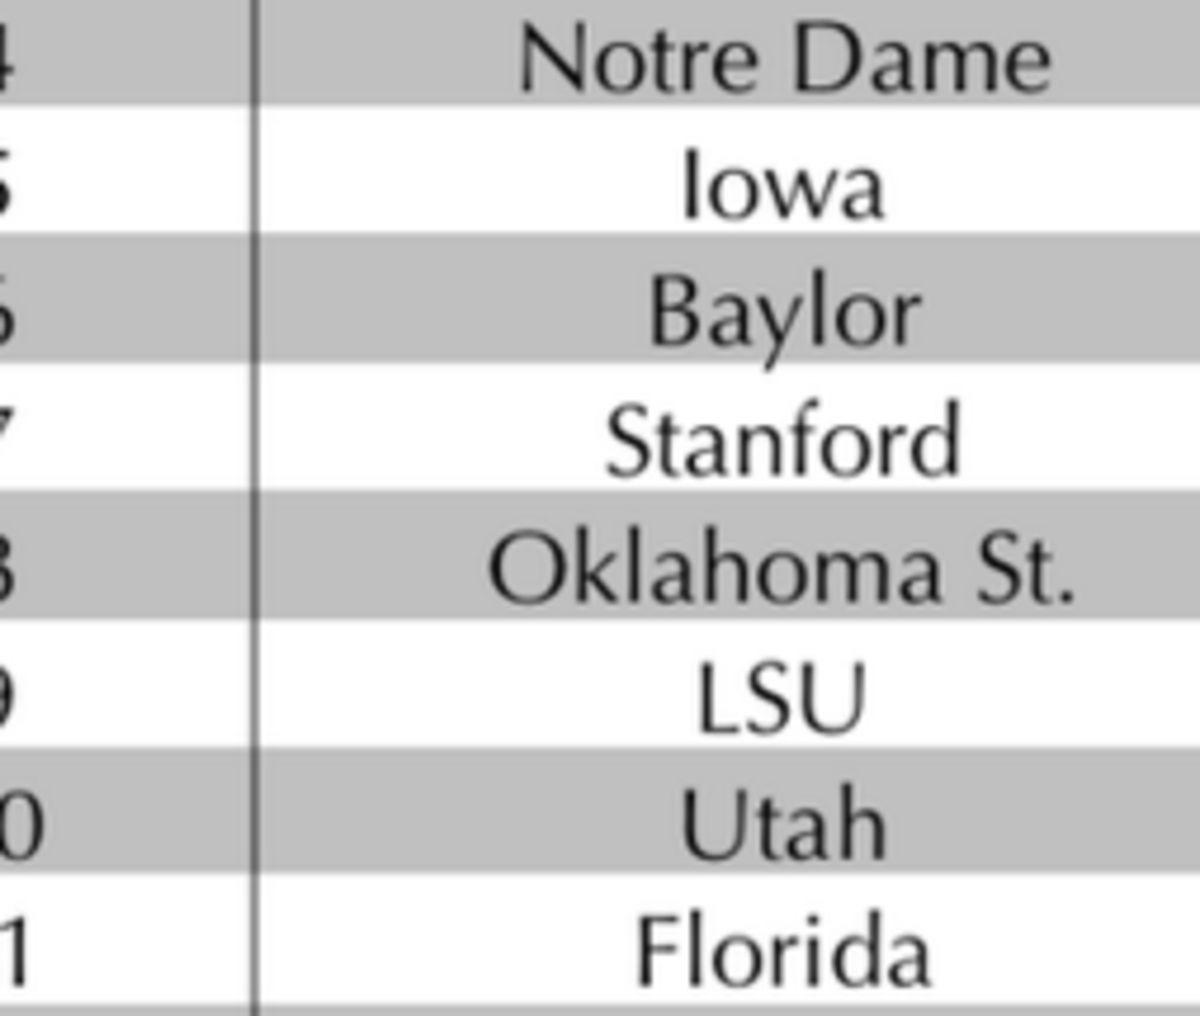 A list of college football teams and their playoff rankings.